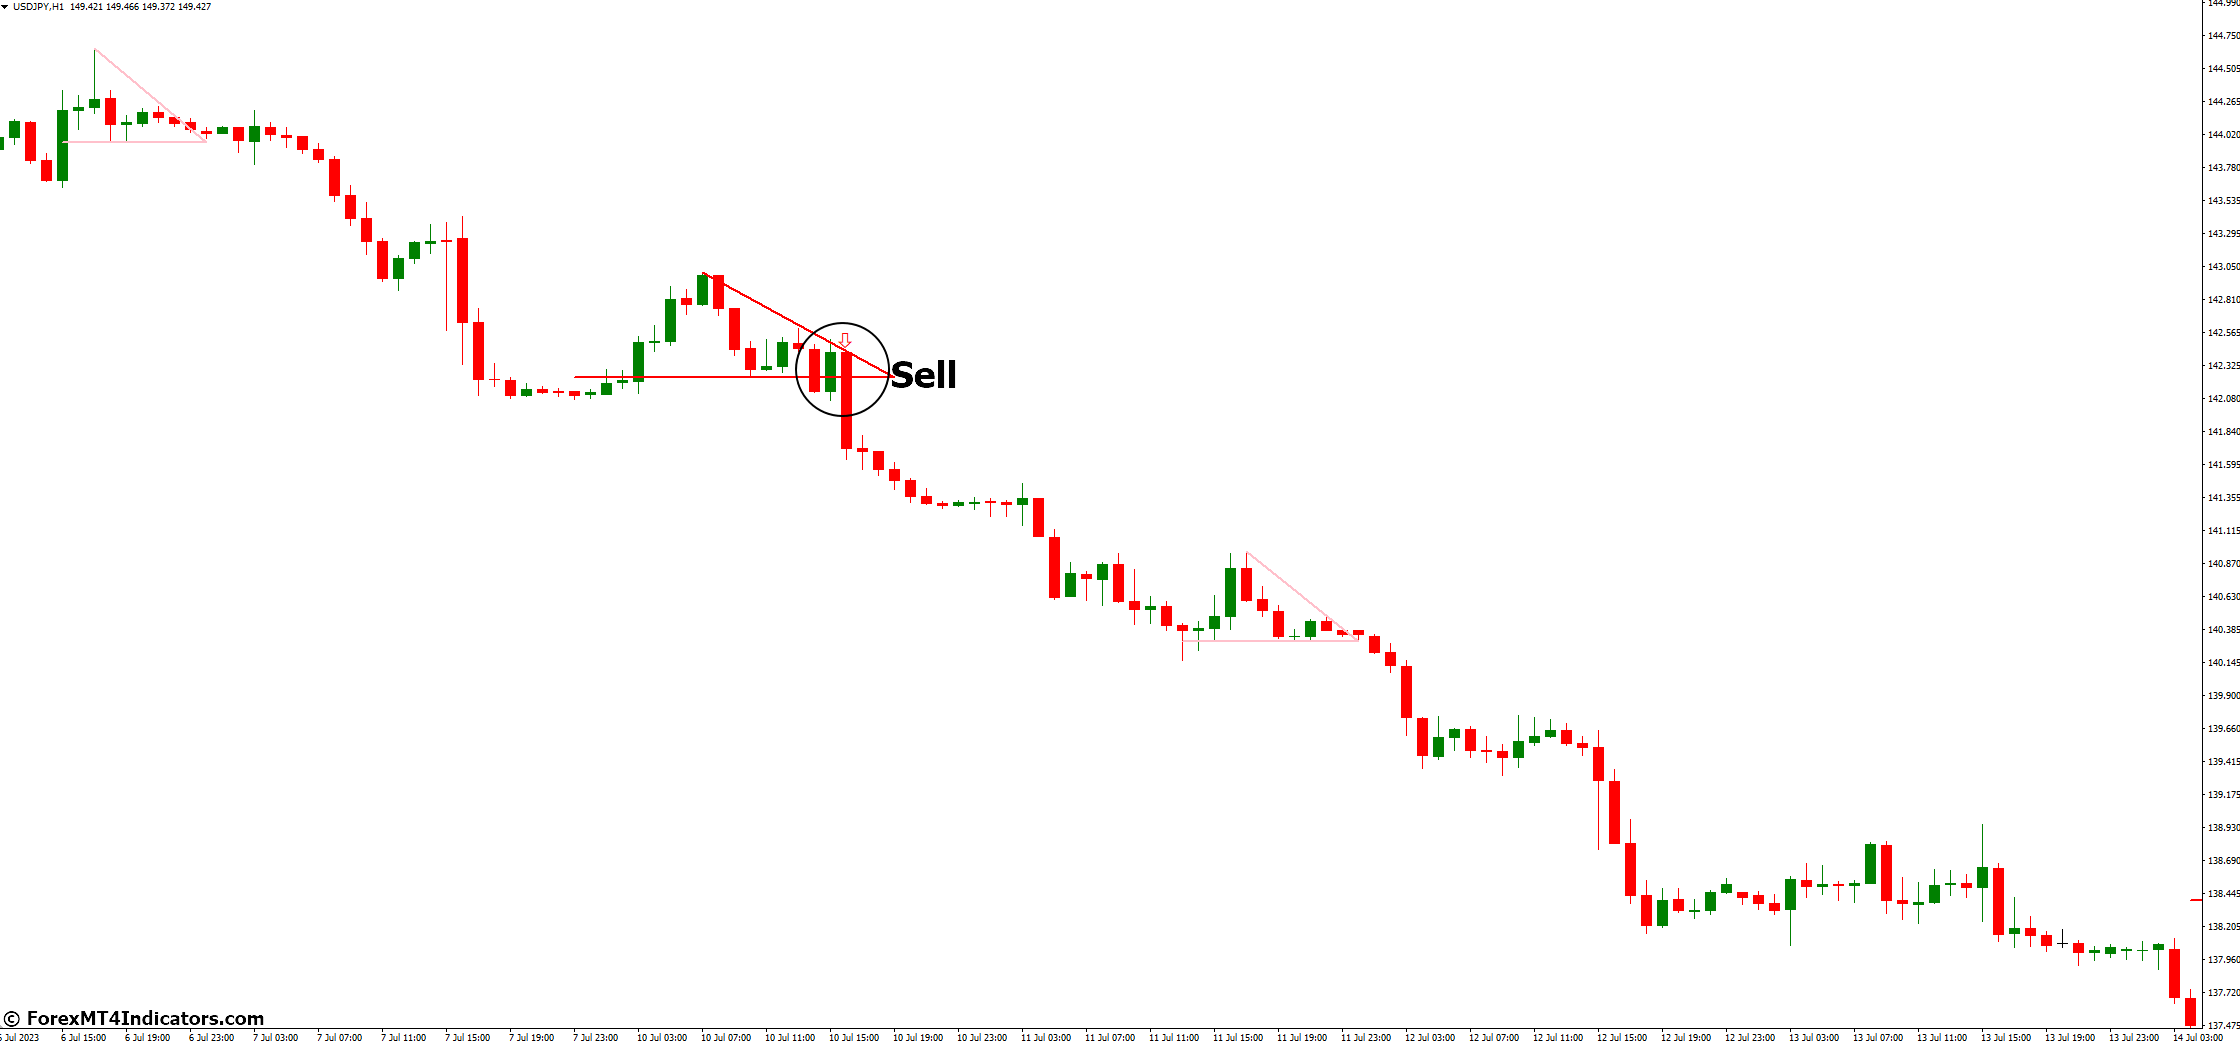 How to Trade with Breakout Pattern MT4 Indicator - Sell Entry